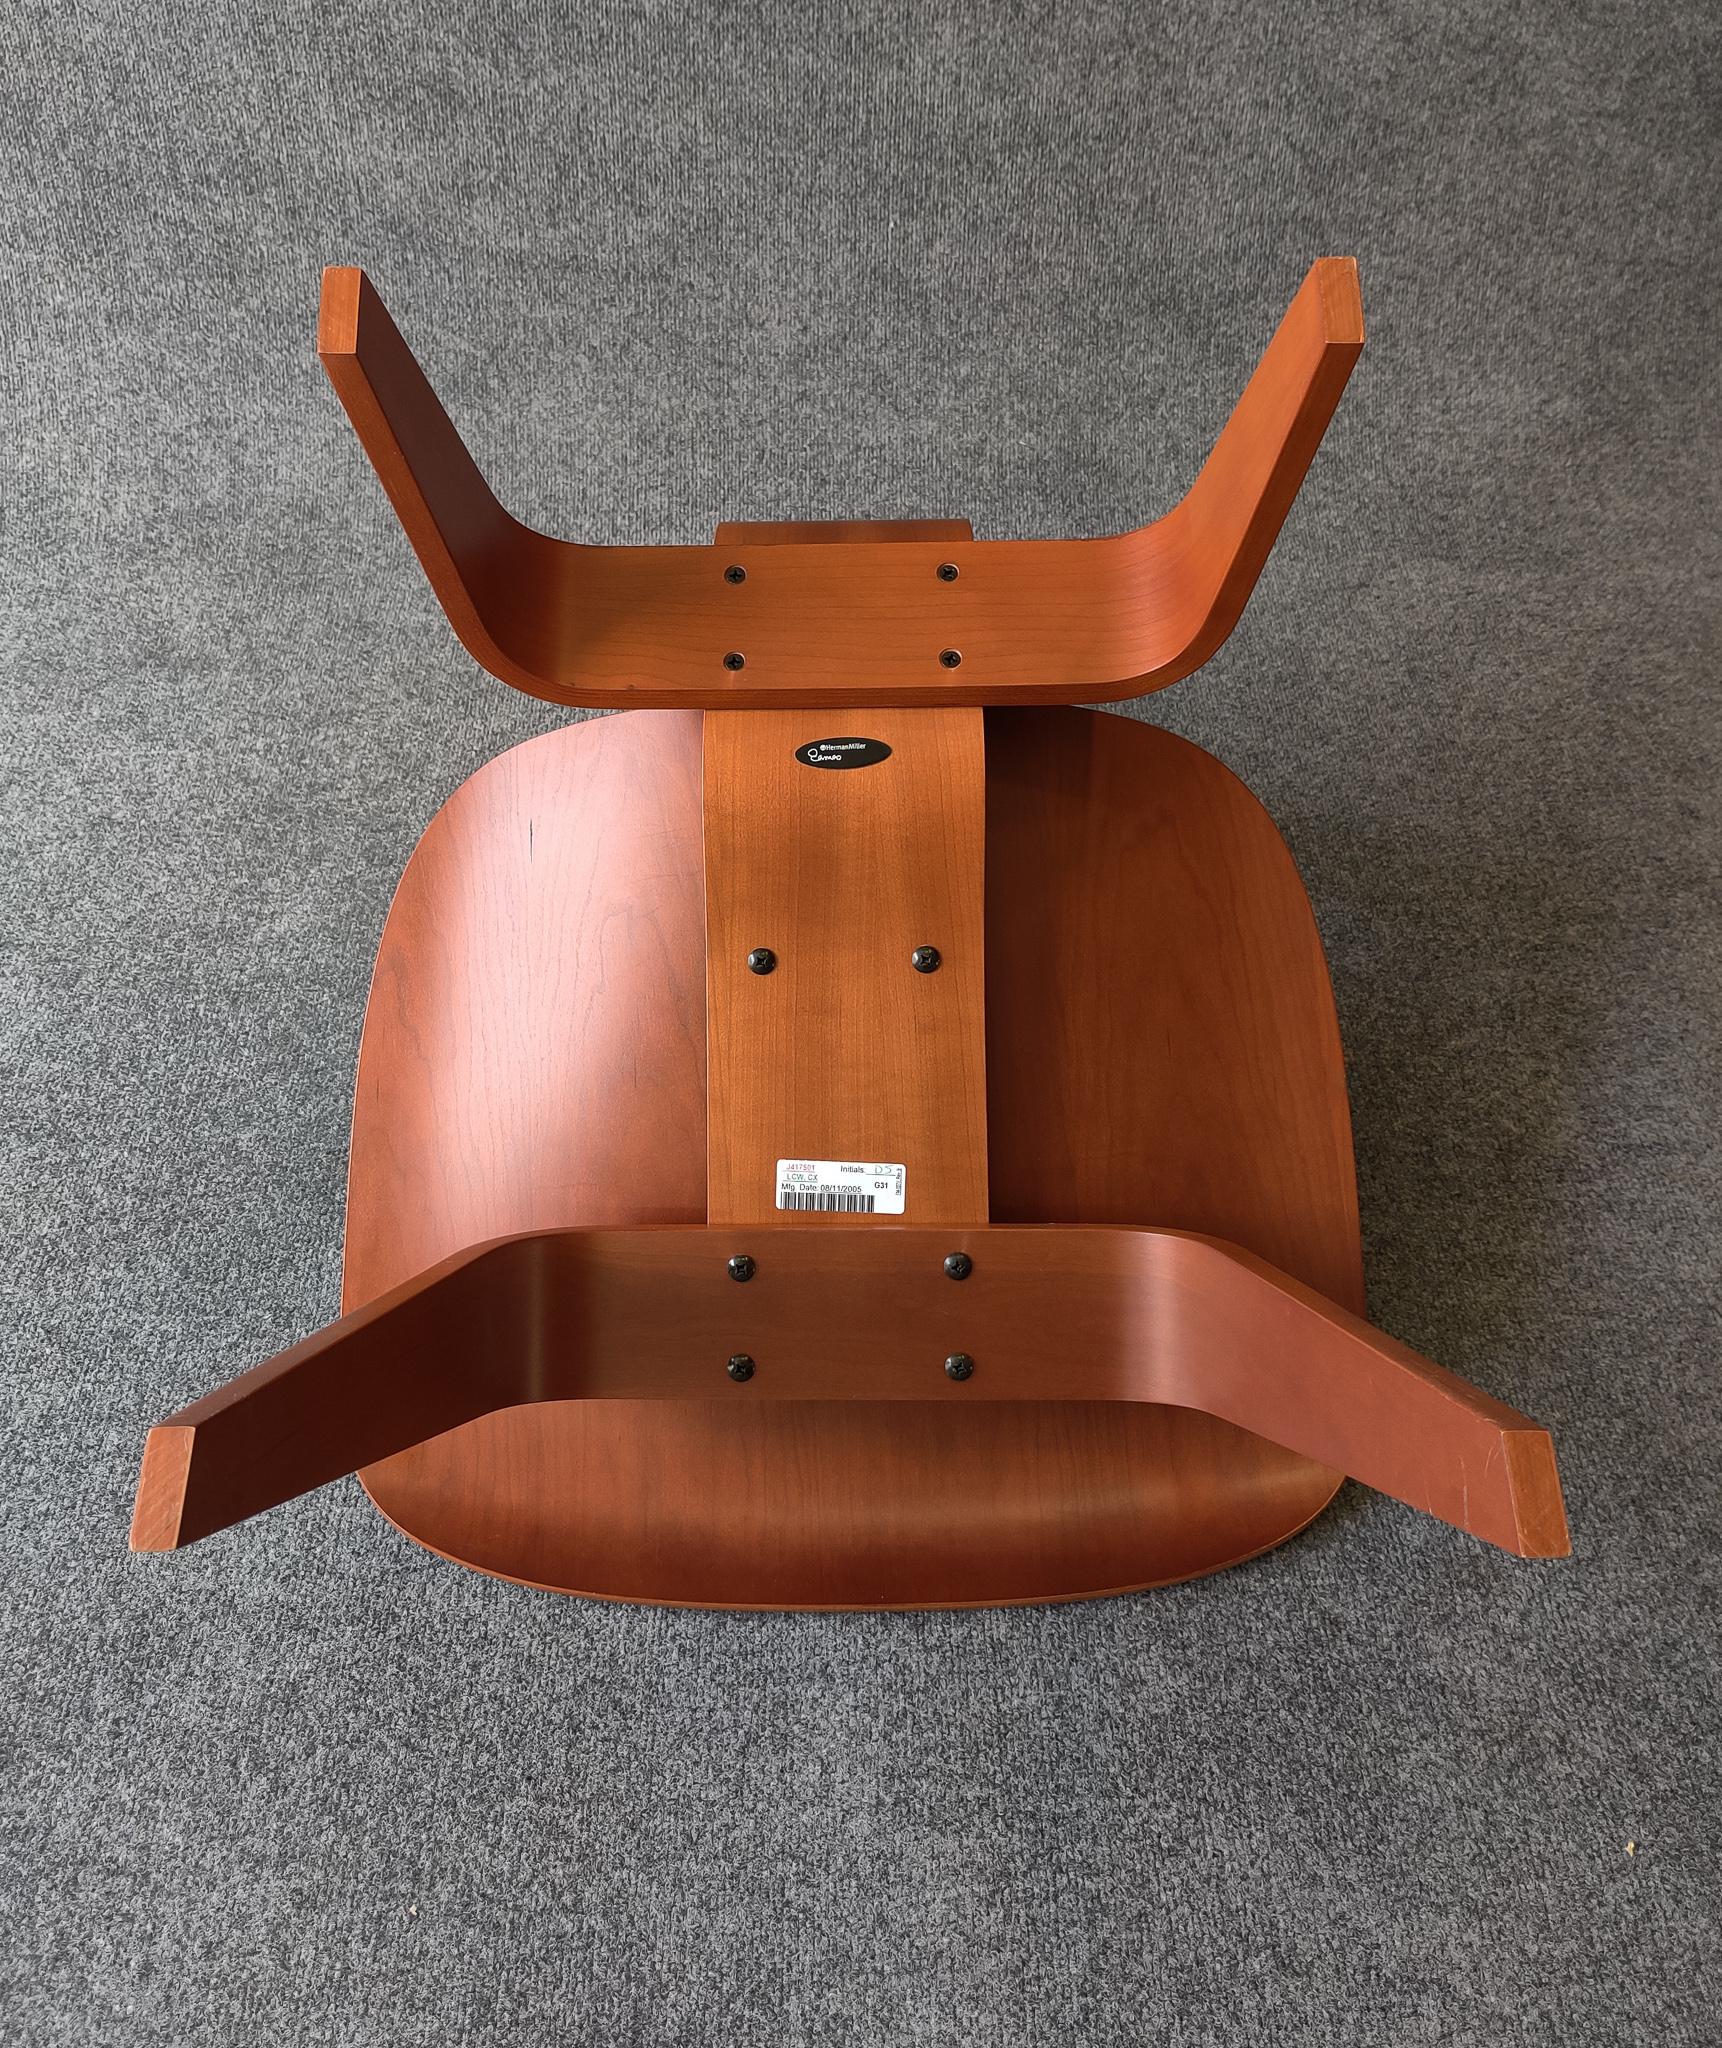 Contemporary Charles & Ray Eames Herman Miller Cherry LCW Lounge Chair Wood 2005 Great Cond!